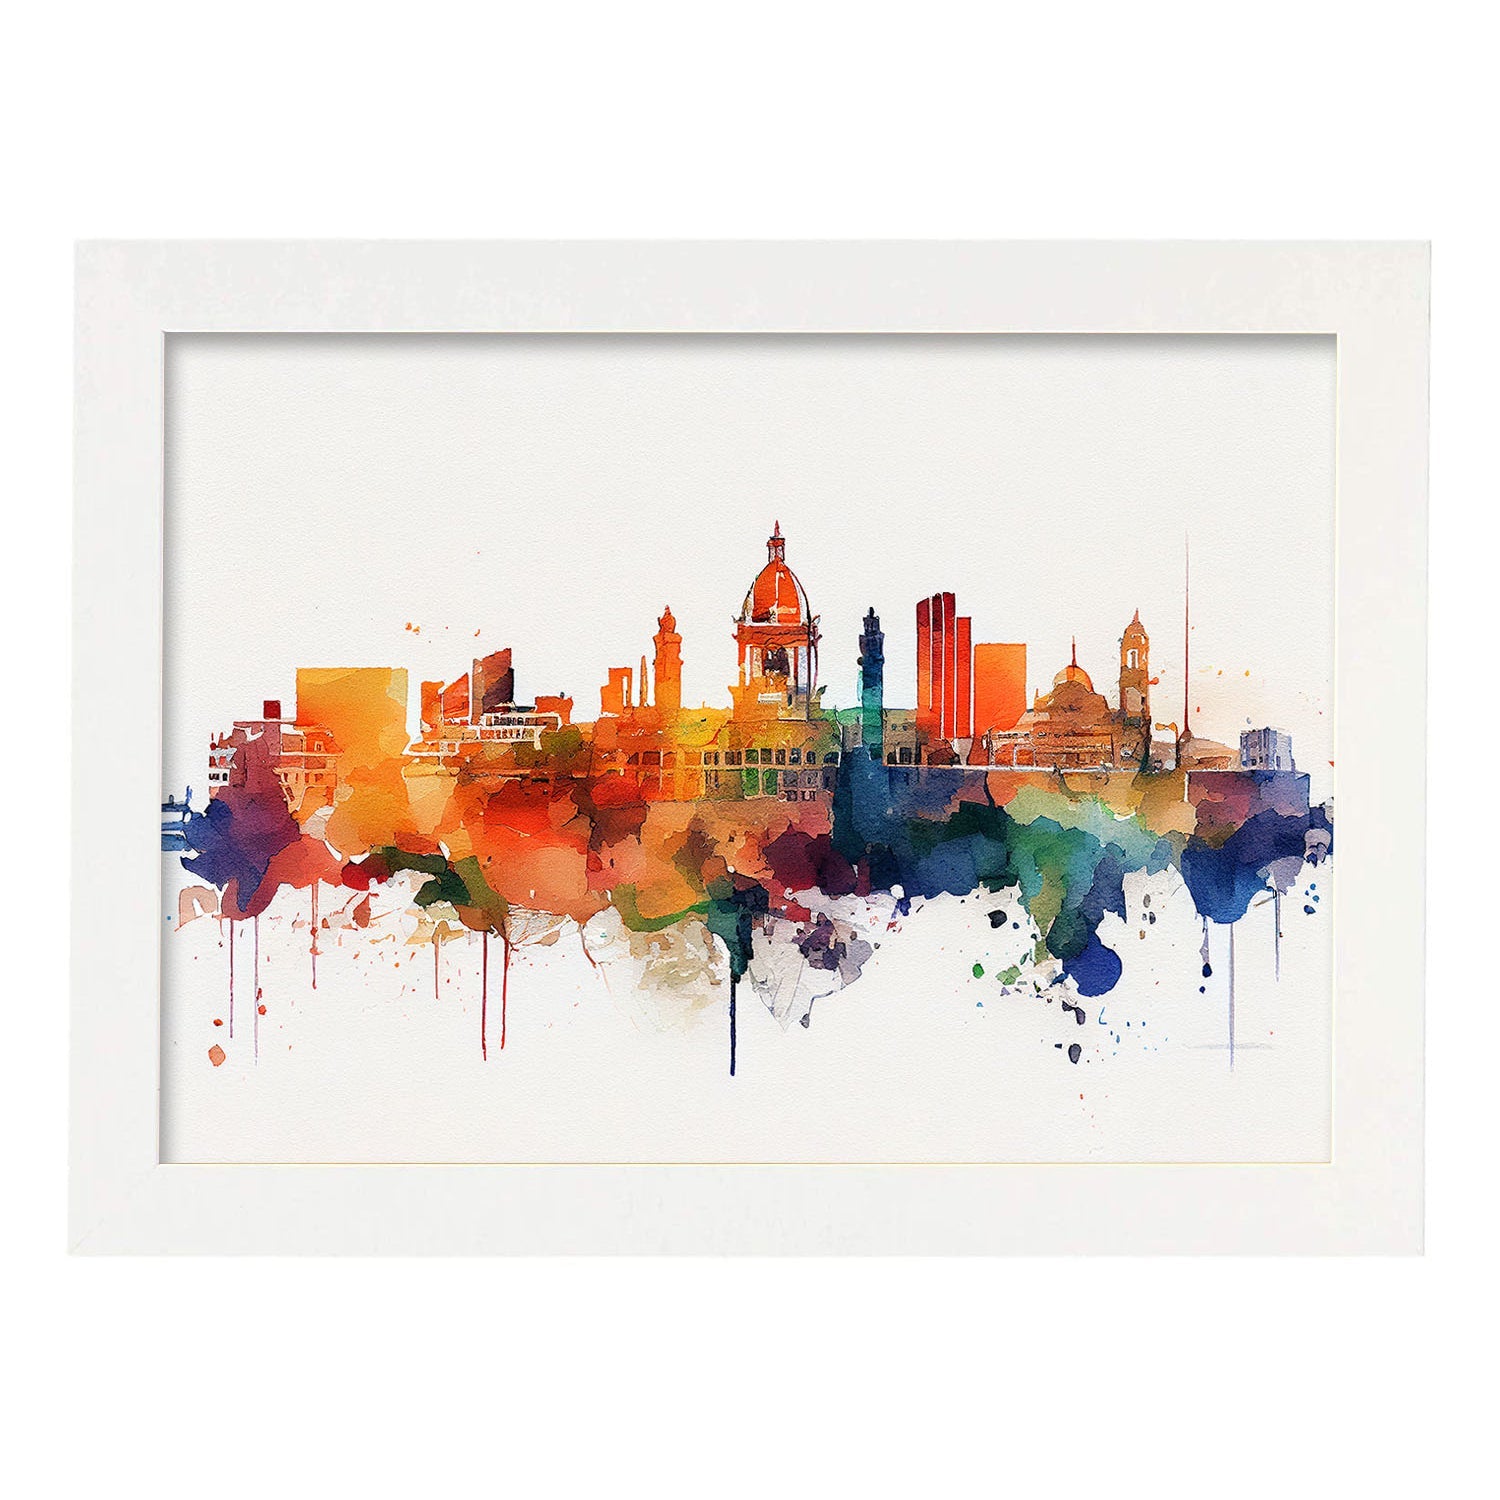 Nacnic watercolor of a skyline of the city of Valencia_2. Aesthetic Wall Art Prints for Bedroom or Living Room Design.-Artwork-Nacnic-A4-Marco Blanco-Nacnic Estudio SL